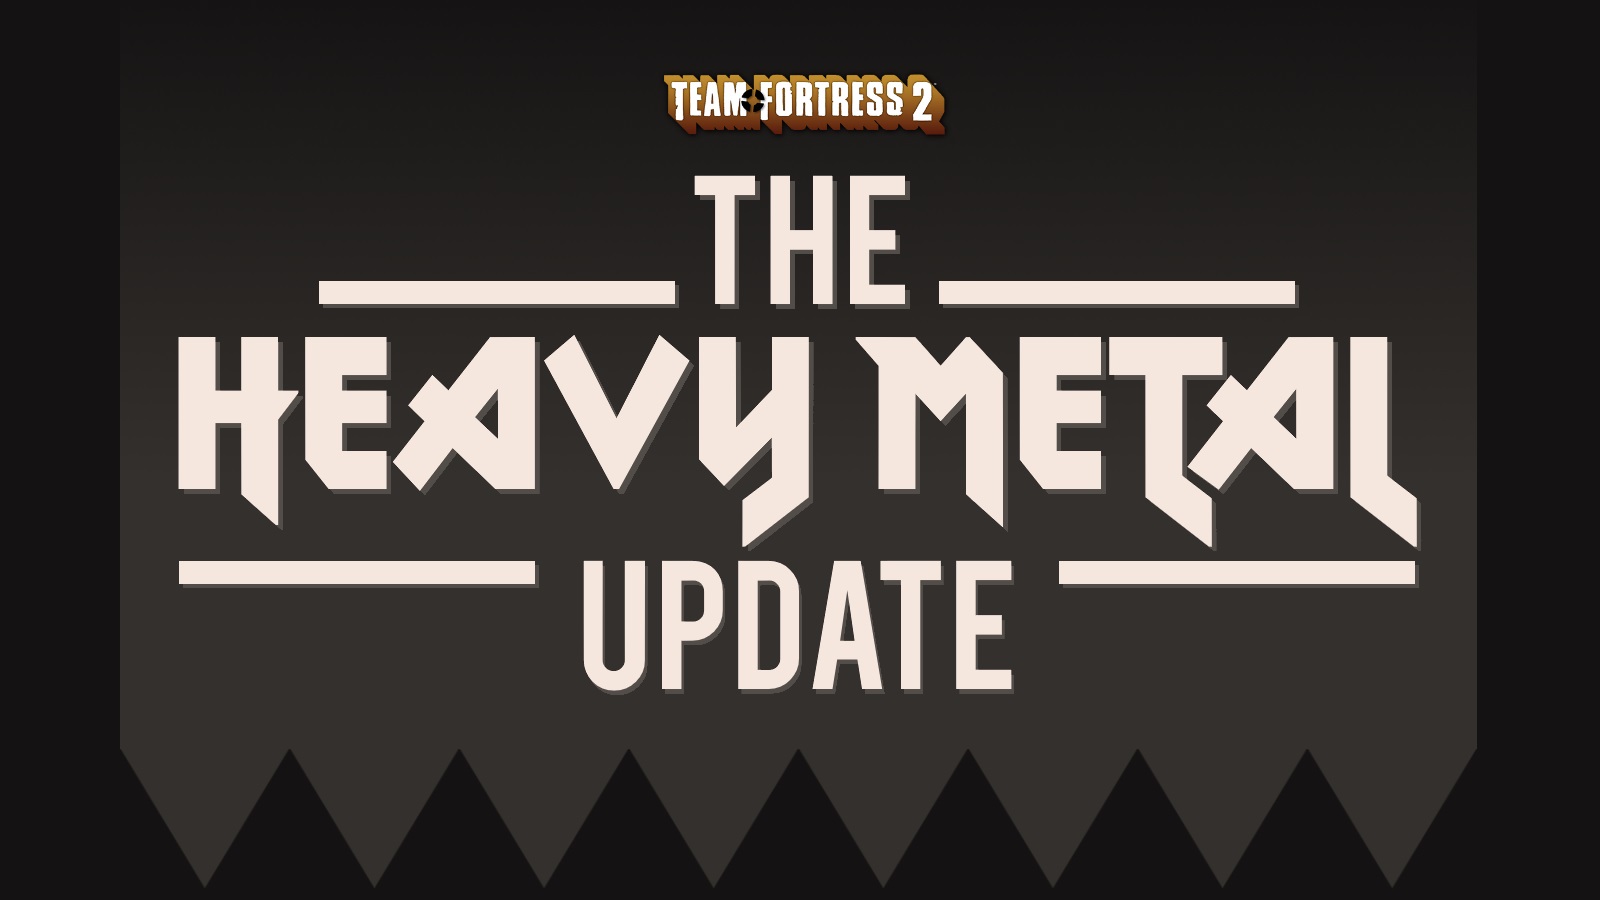 Team Fortress 2 - The Heavy Metal Update.